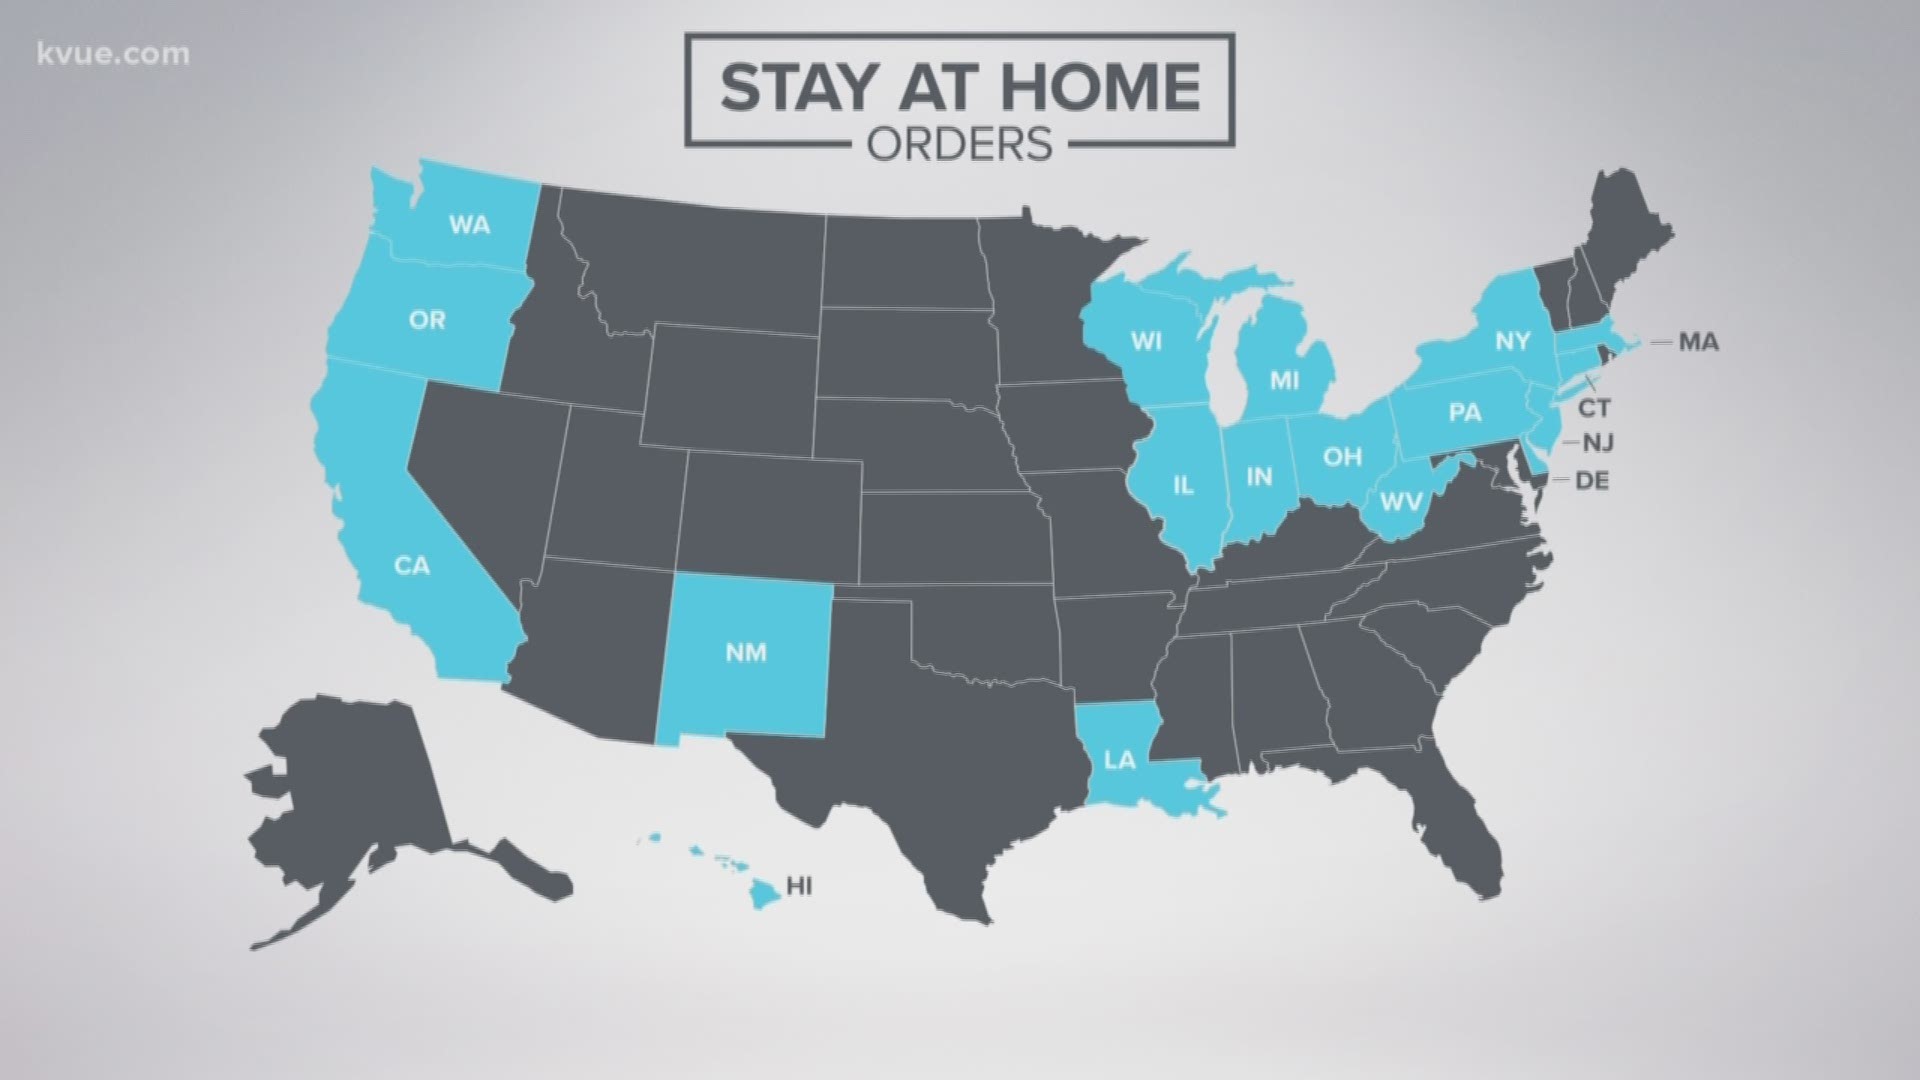 While "stay home" orders are taking effect in Central Texas, not all Texans are under the same restrictions.